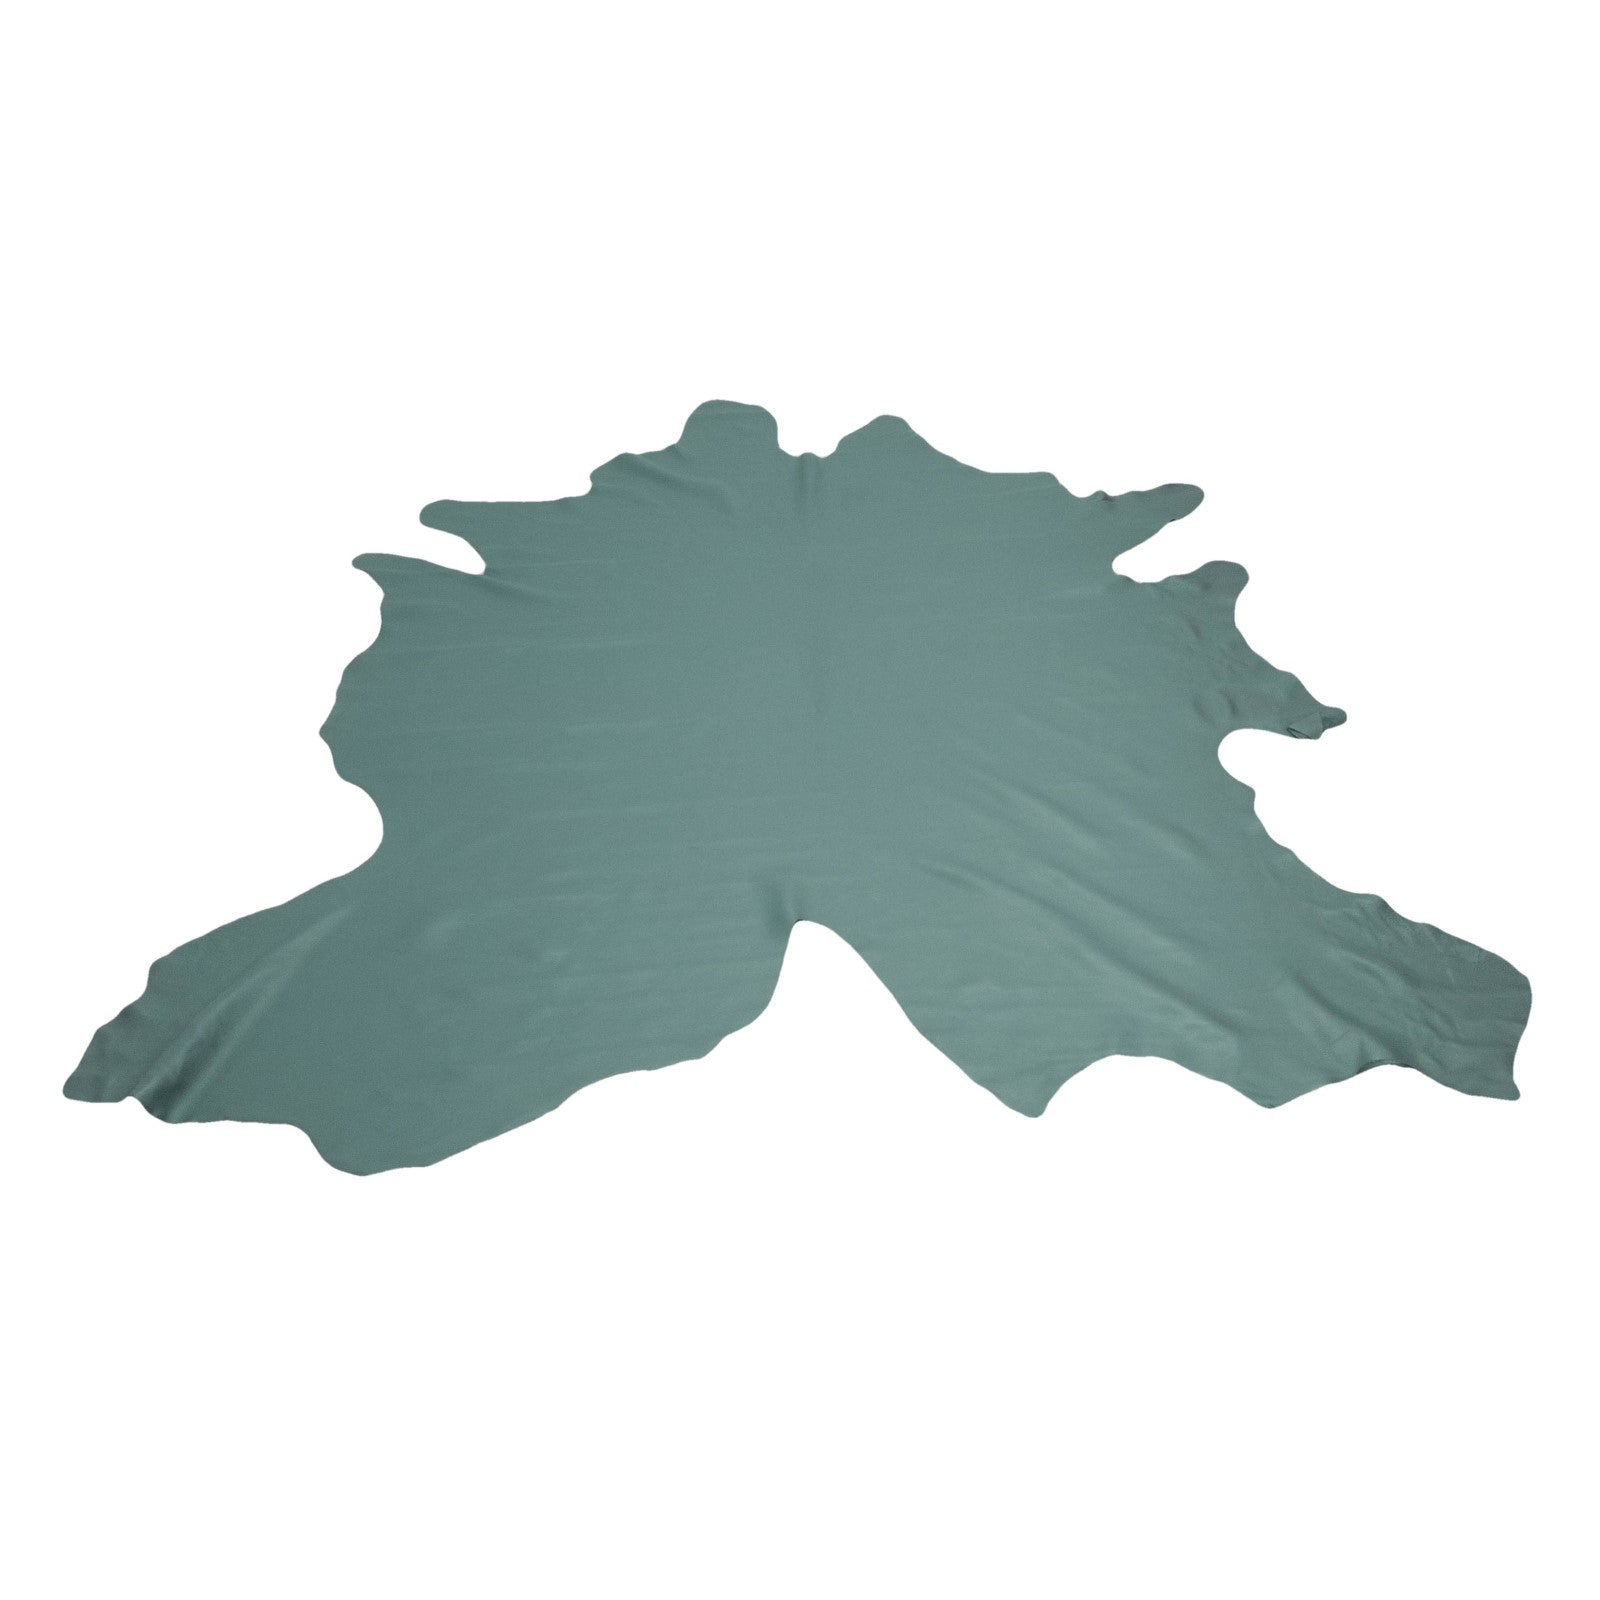 Tucson Teal, 3-4 oz, 43-57 SqFt, Full Upholstery Cow Hide, 43-47 | The Leather Guy